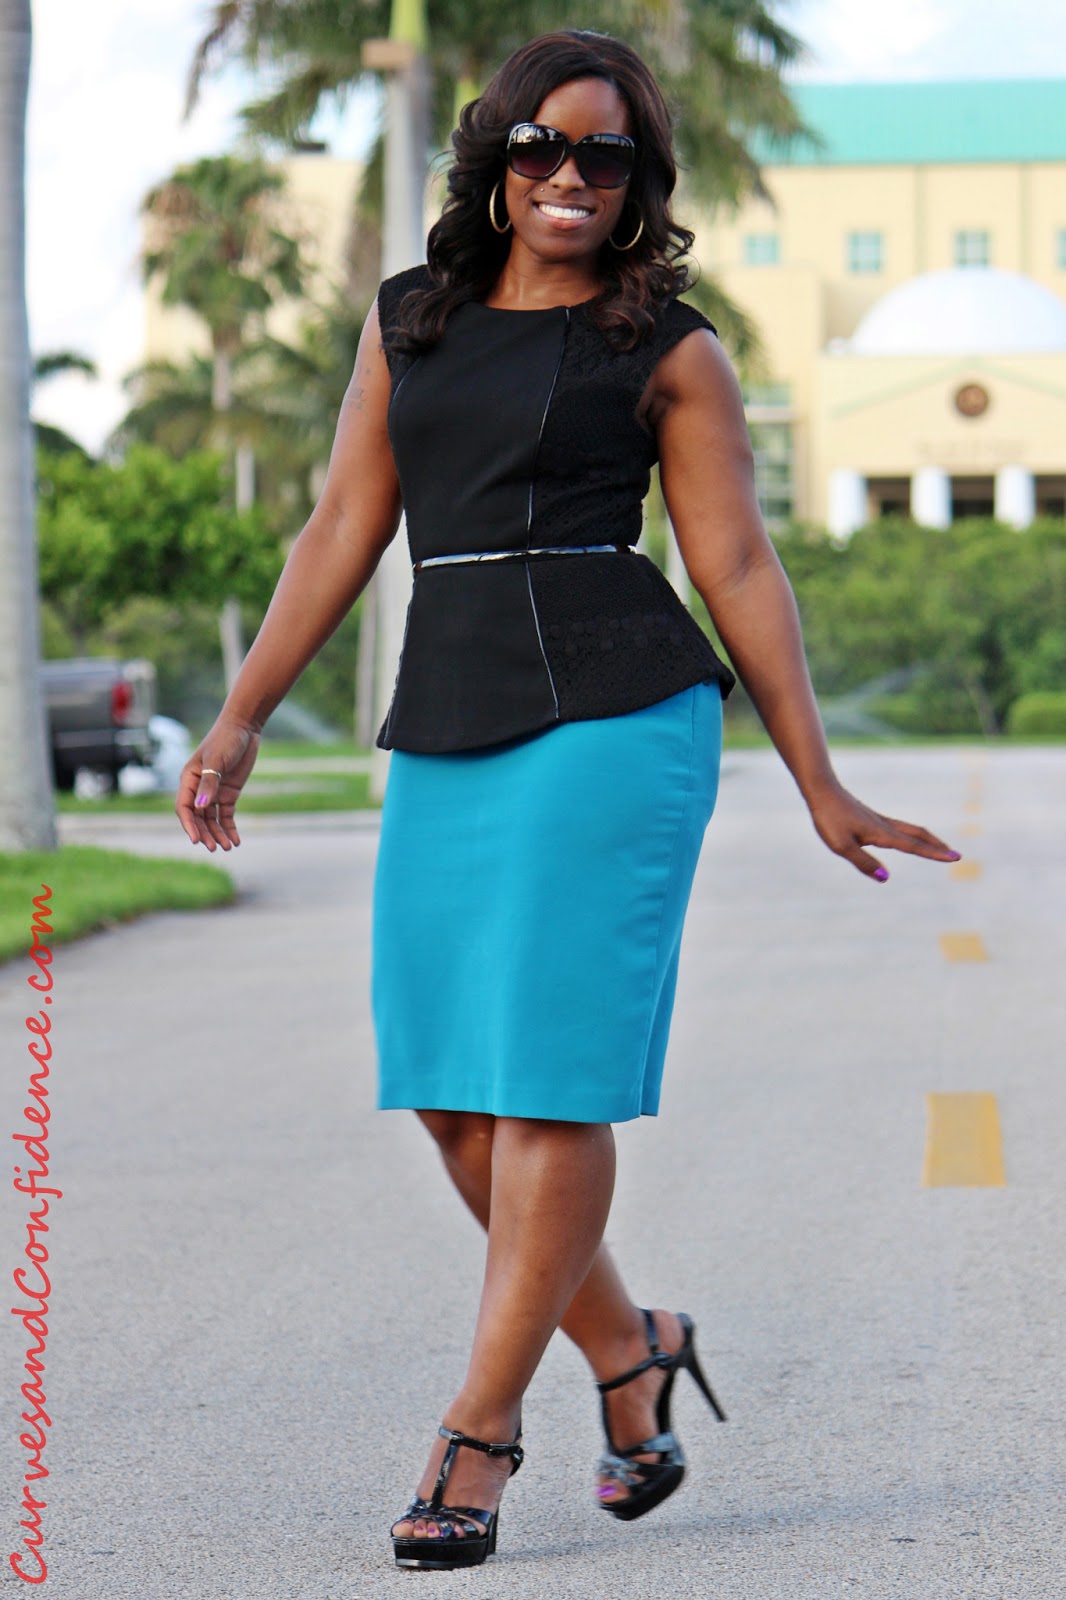 Peplum and a Pencil Skirt - Curves and Confidence